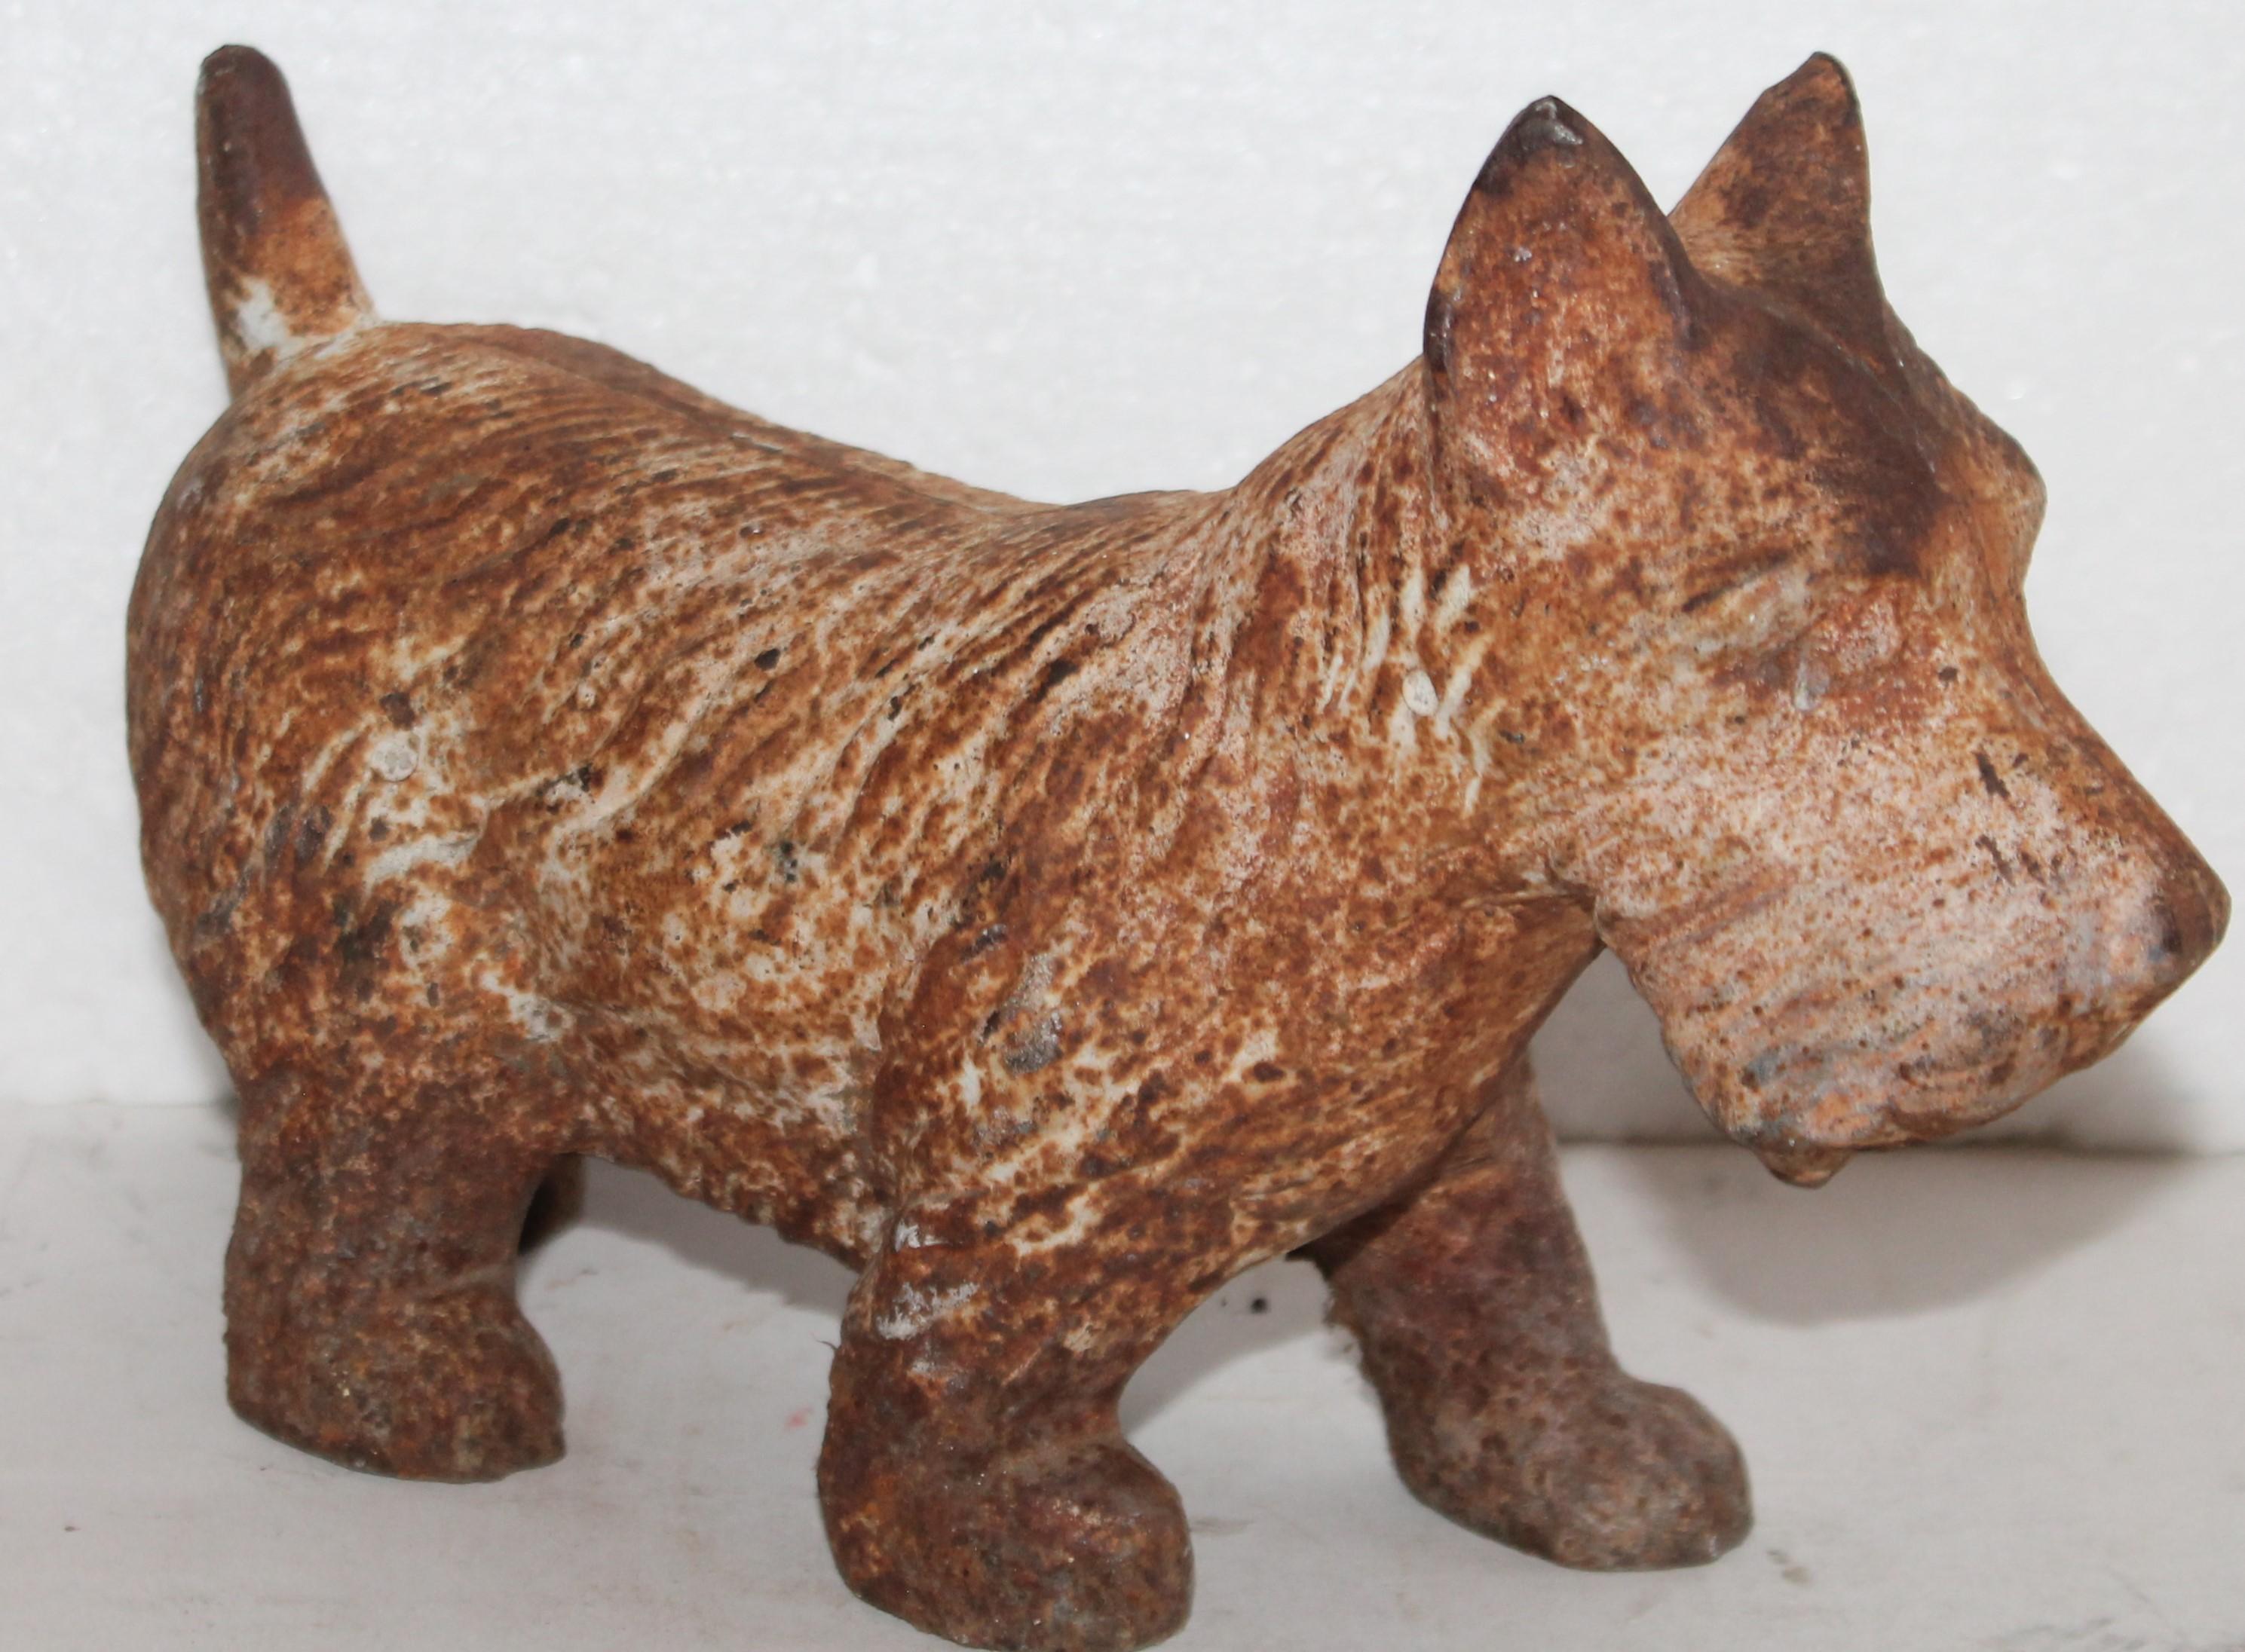 This original aged and worn heavy Hubley Scottie door stop. This is especially heavy weighted door stop. This is the best worn surface ever!